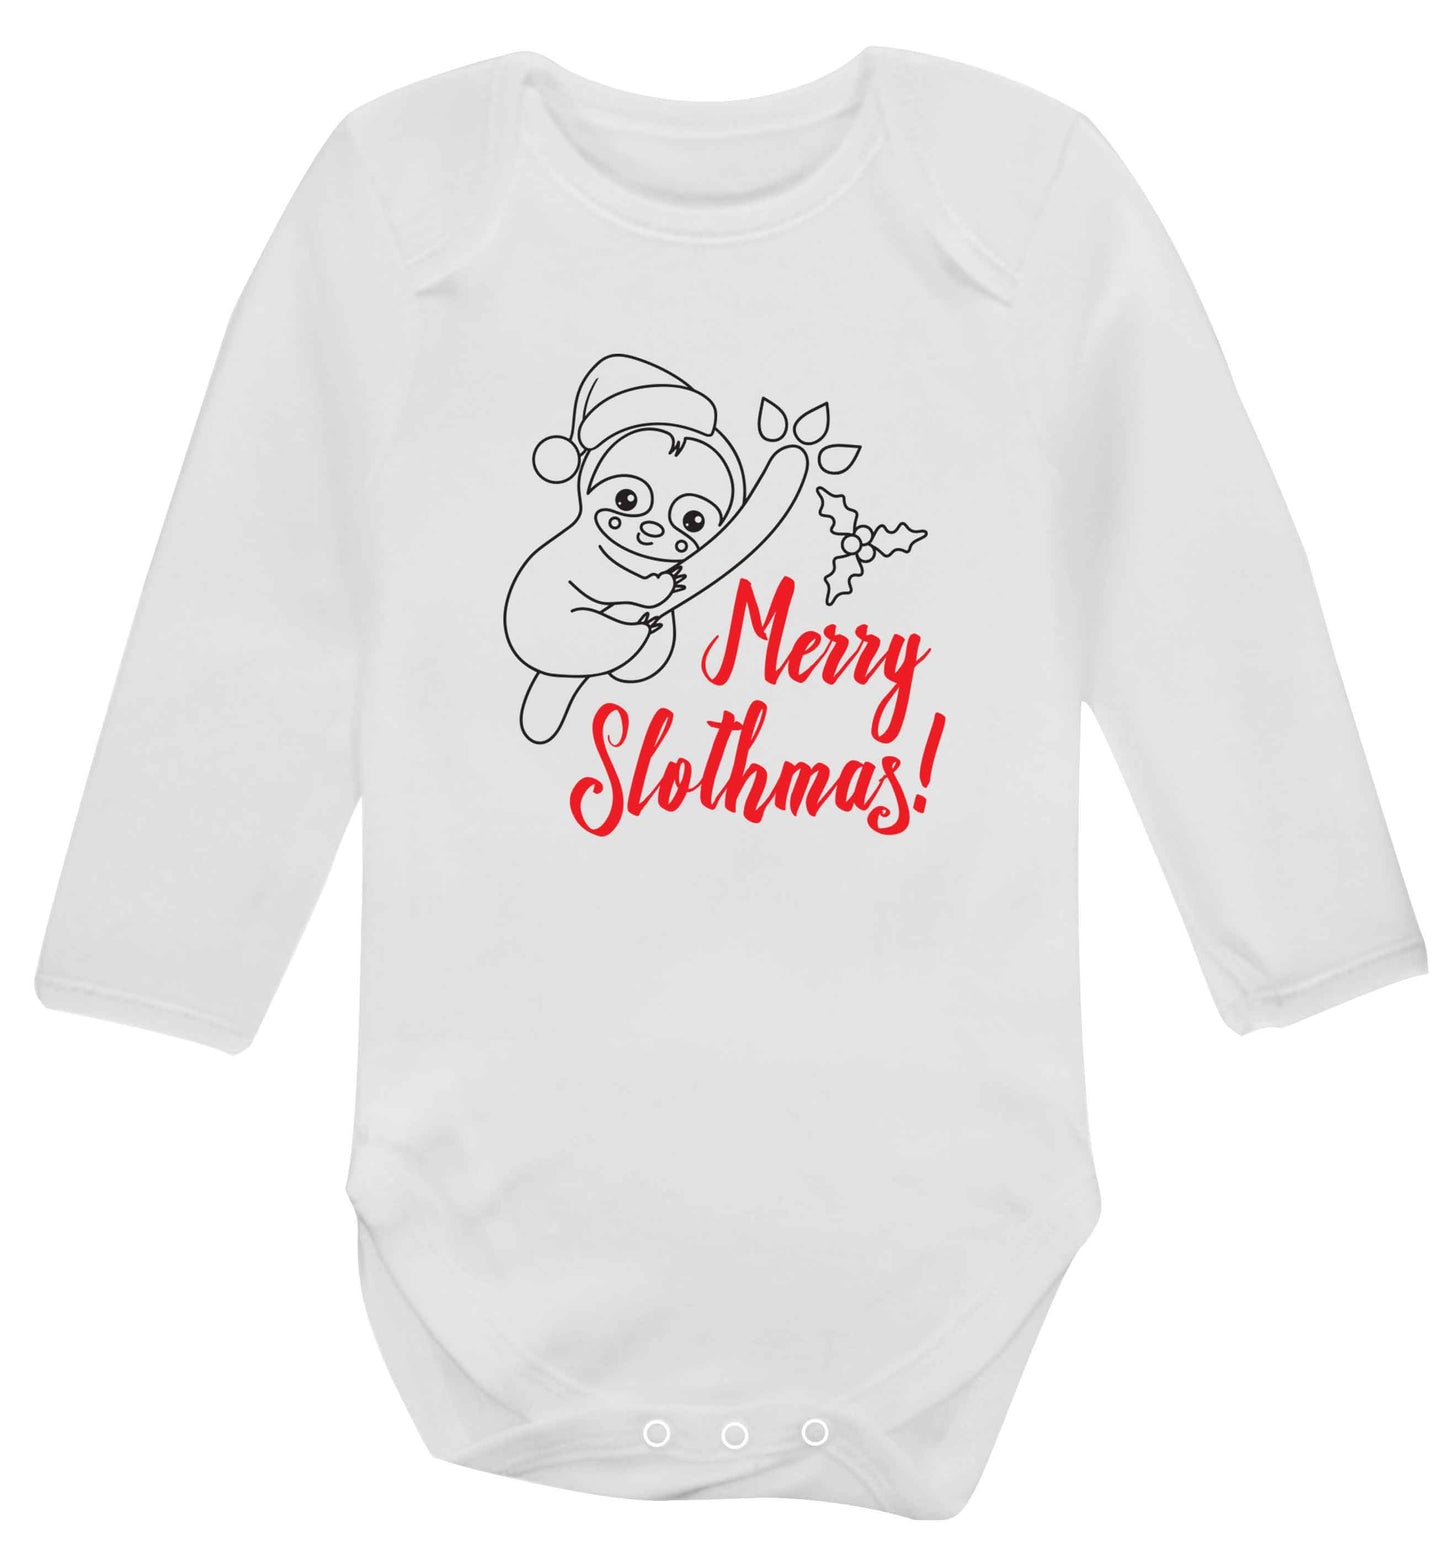 Merry Slothmas baby vest long sleeved white 6-12 months